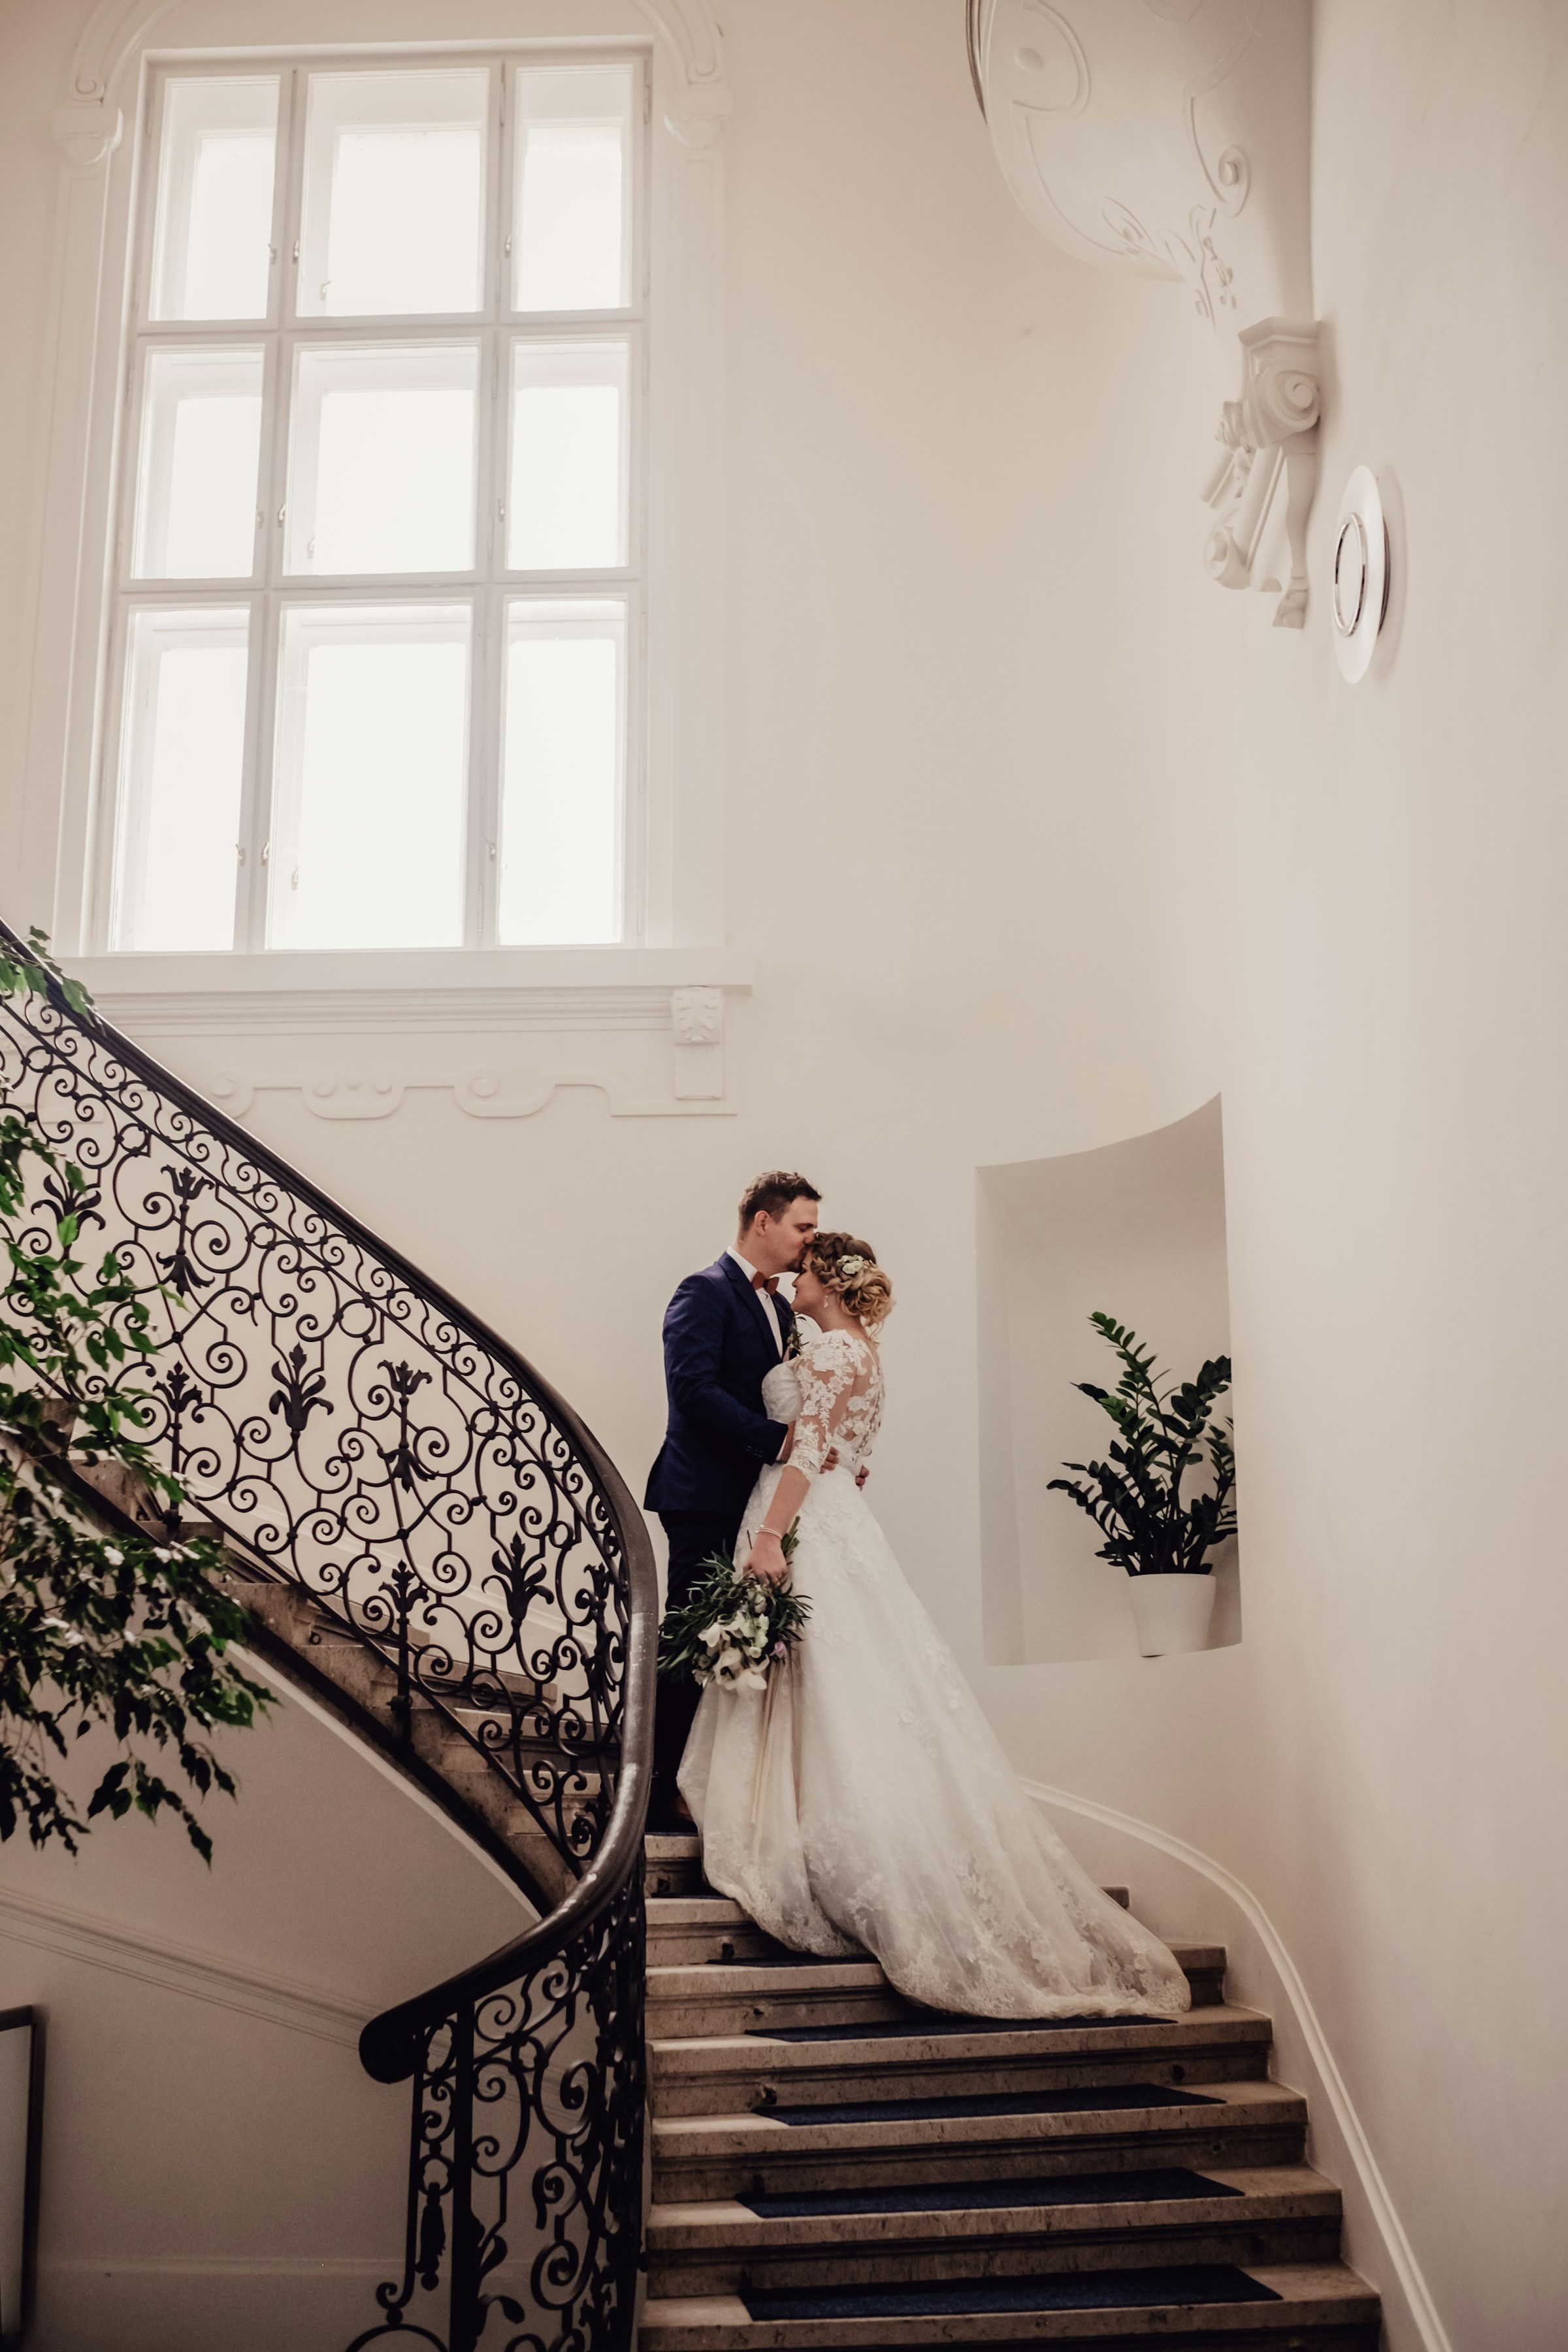 A bridal couple on a staircase | Source: Unsplash